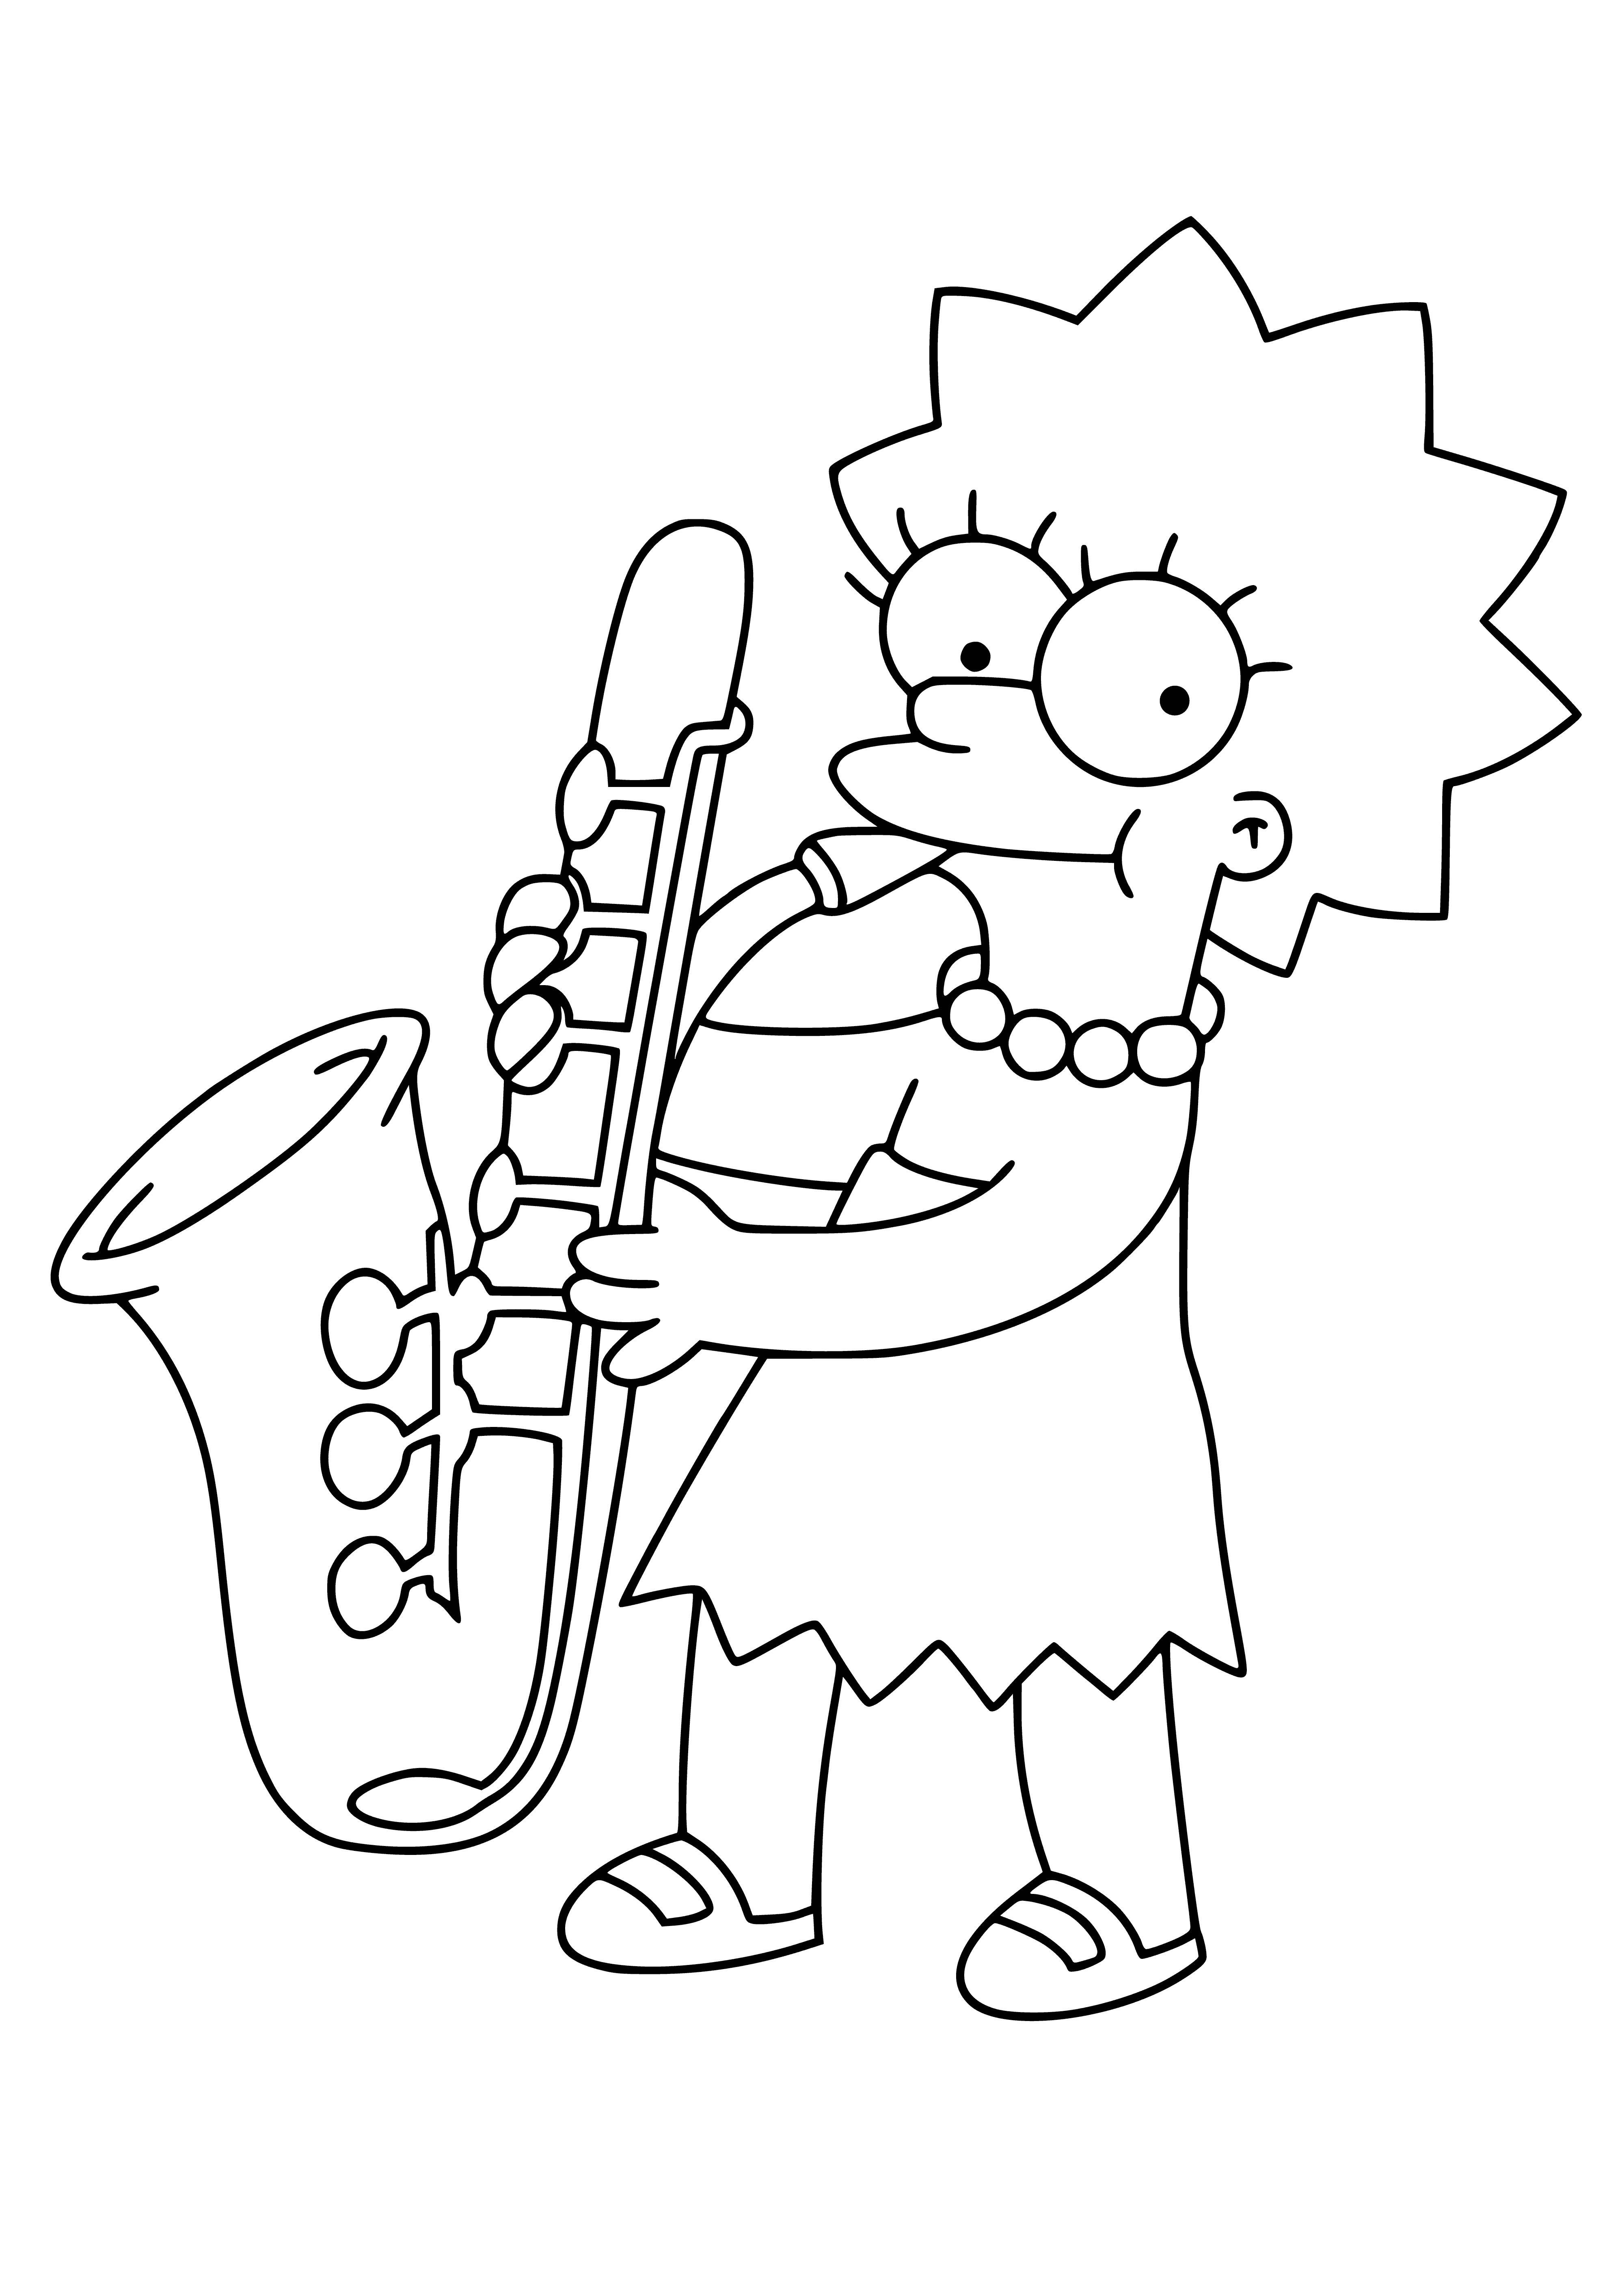 coloring page: Lisa, a young girl in glasses and white shirt, holds a saxophone while wearing a blue dress.